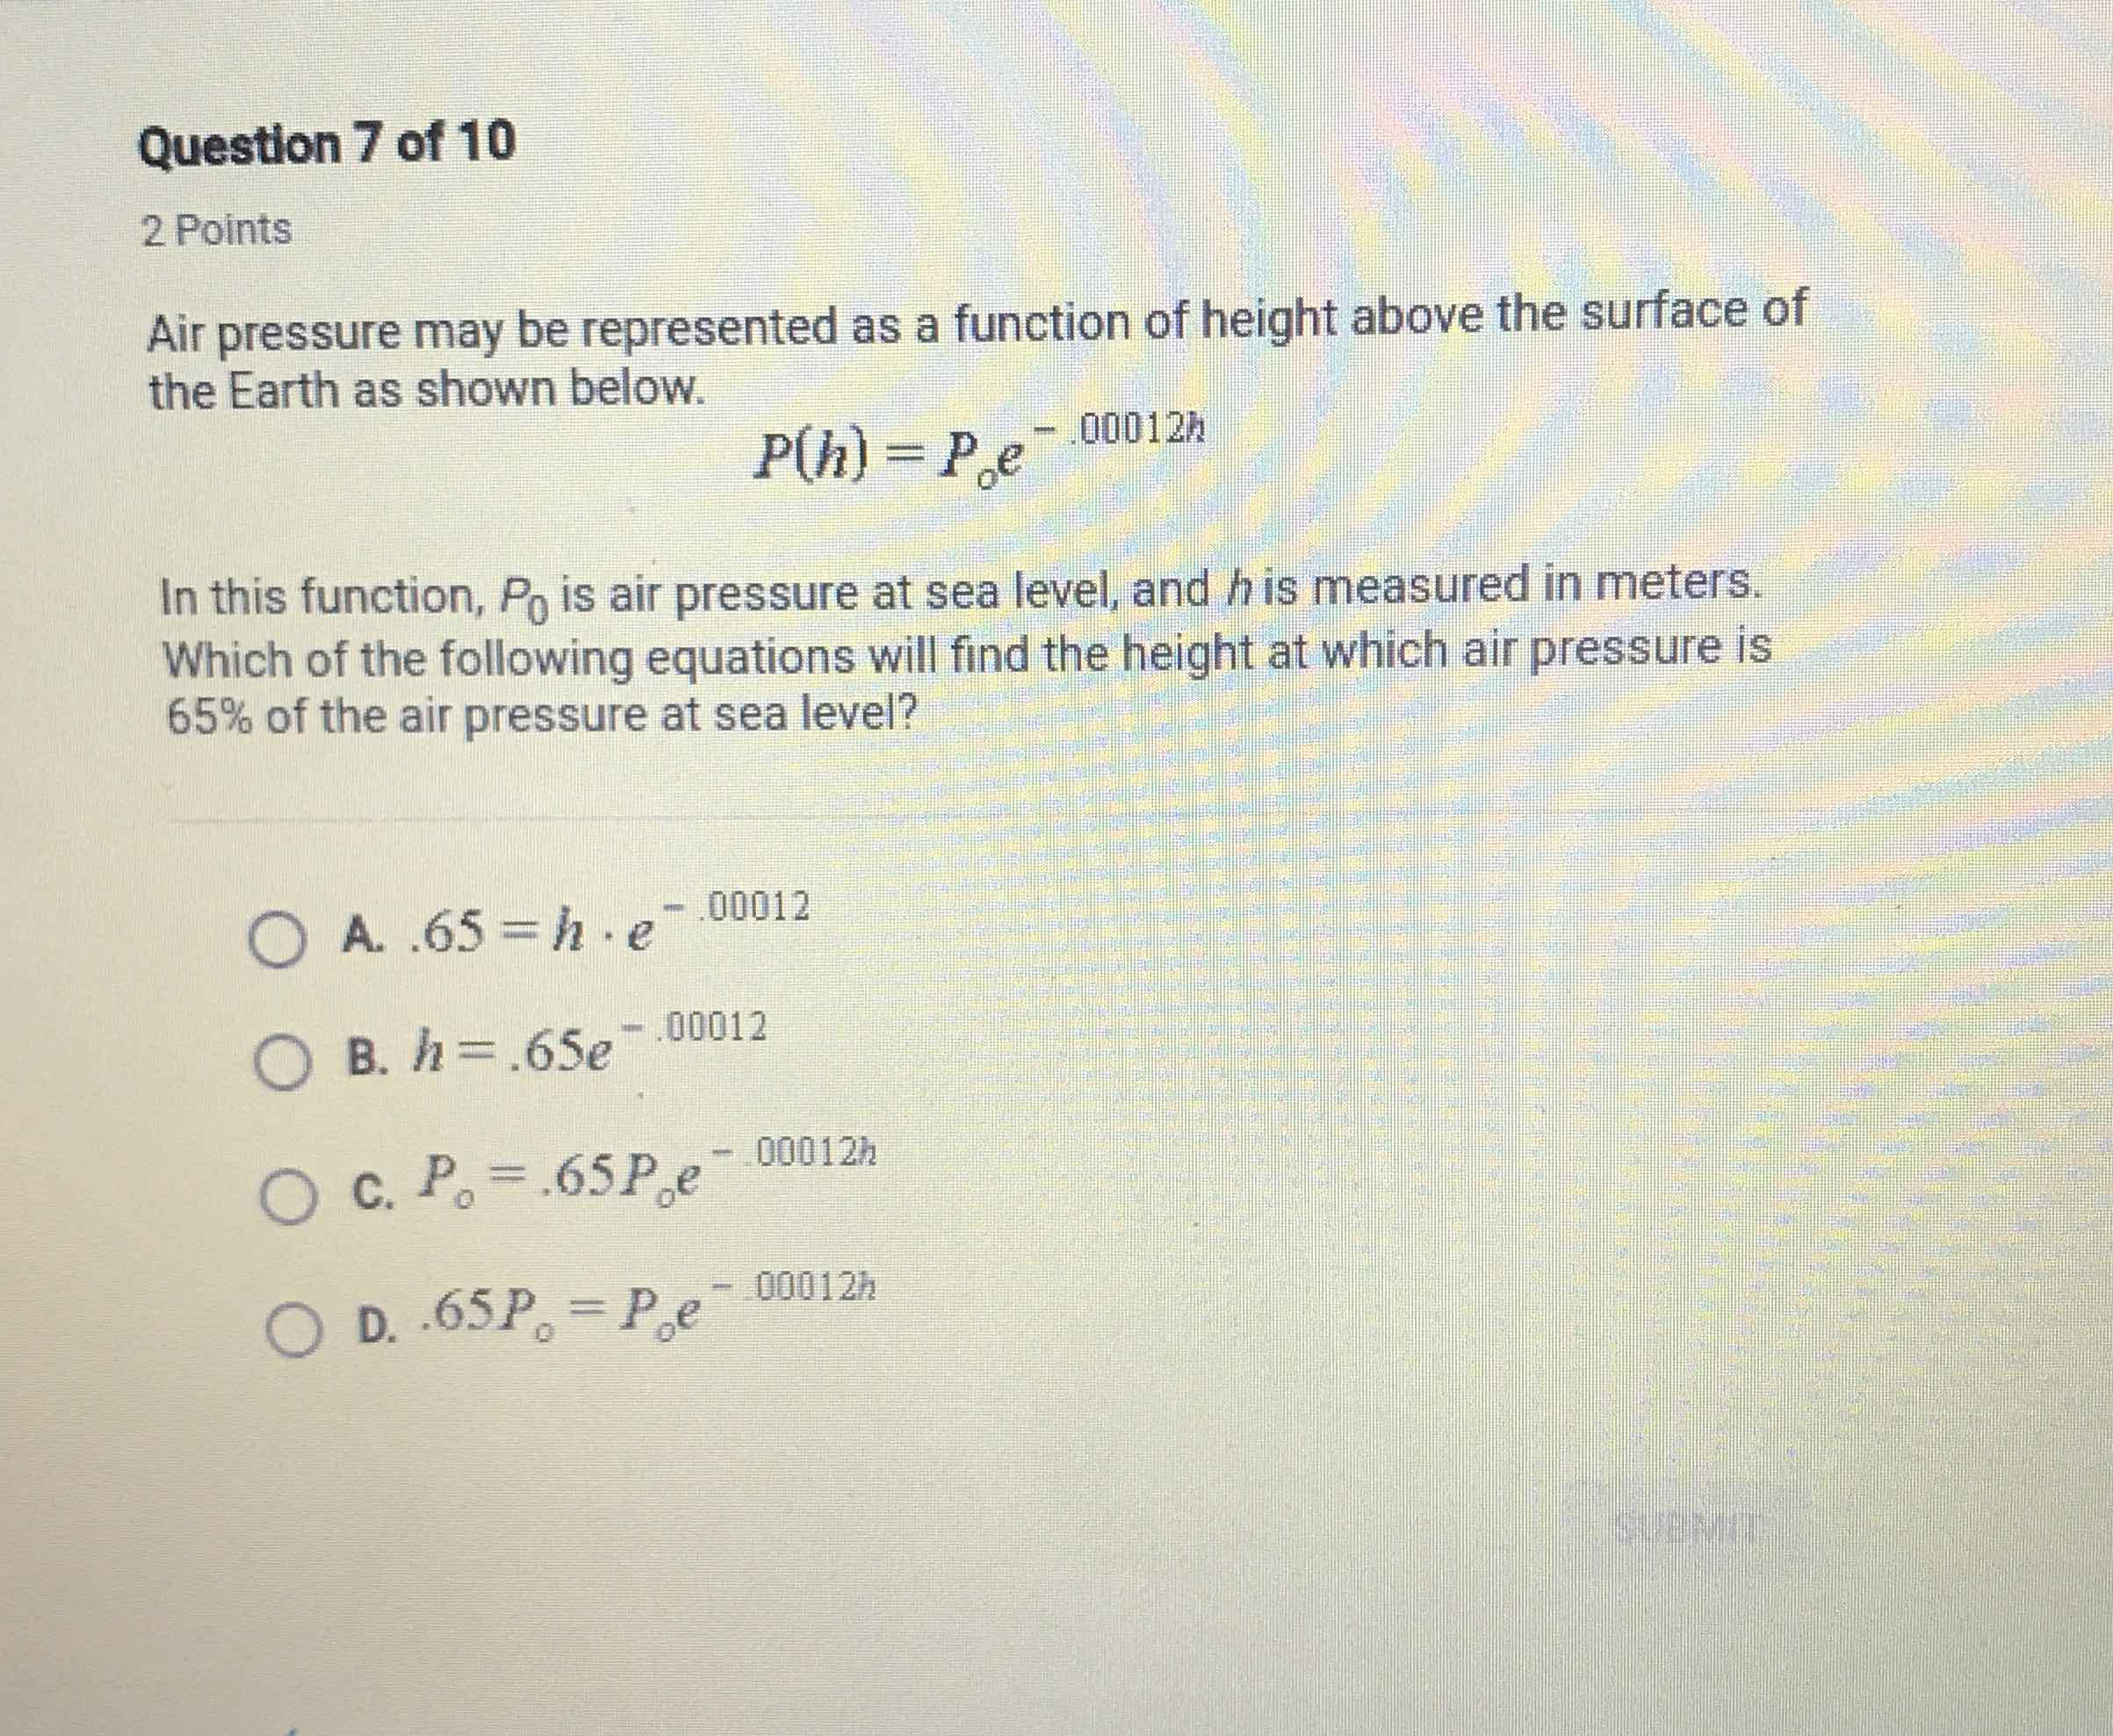 Question 7 of 10
2 Points
Air pressure may be represented as a function of height above the surface of the Earth as shown below.
\[
P(h)=P_{0} e^{-.00012 h}
\]
In this function, \( P_{0} \) is air pressure at sea level, and \( h \) is measured in meters. Which of the following equations will find the height at which air pressure is \( 65 \% \) of the air pressure at sea level?
A. \( .65=h \cdot e^{-.00012} \)
B. \( h=.65 e^{-.00012} \)
C. \( P_{0}=.65 P_{0} e^{-.00012 h} \)
D. \( 65 P_{0}=P_{0} e^{-.00012 h} \)